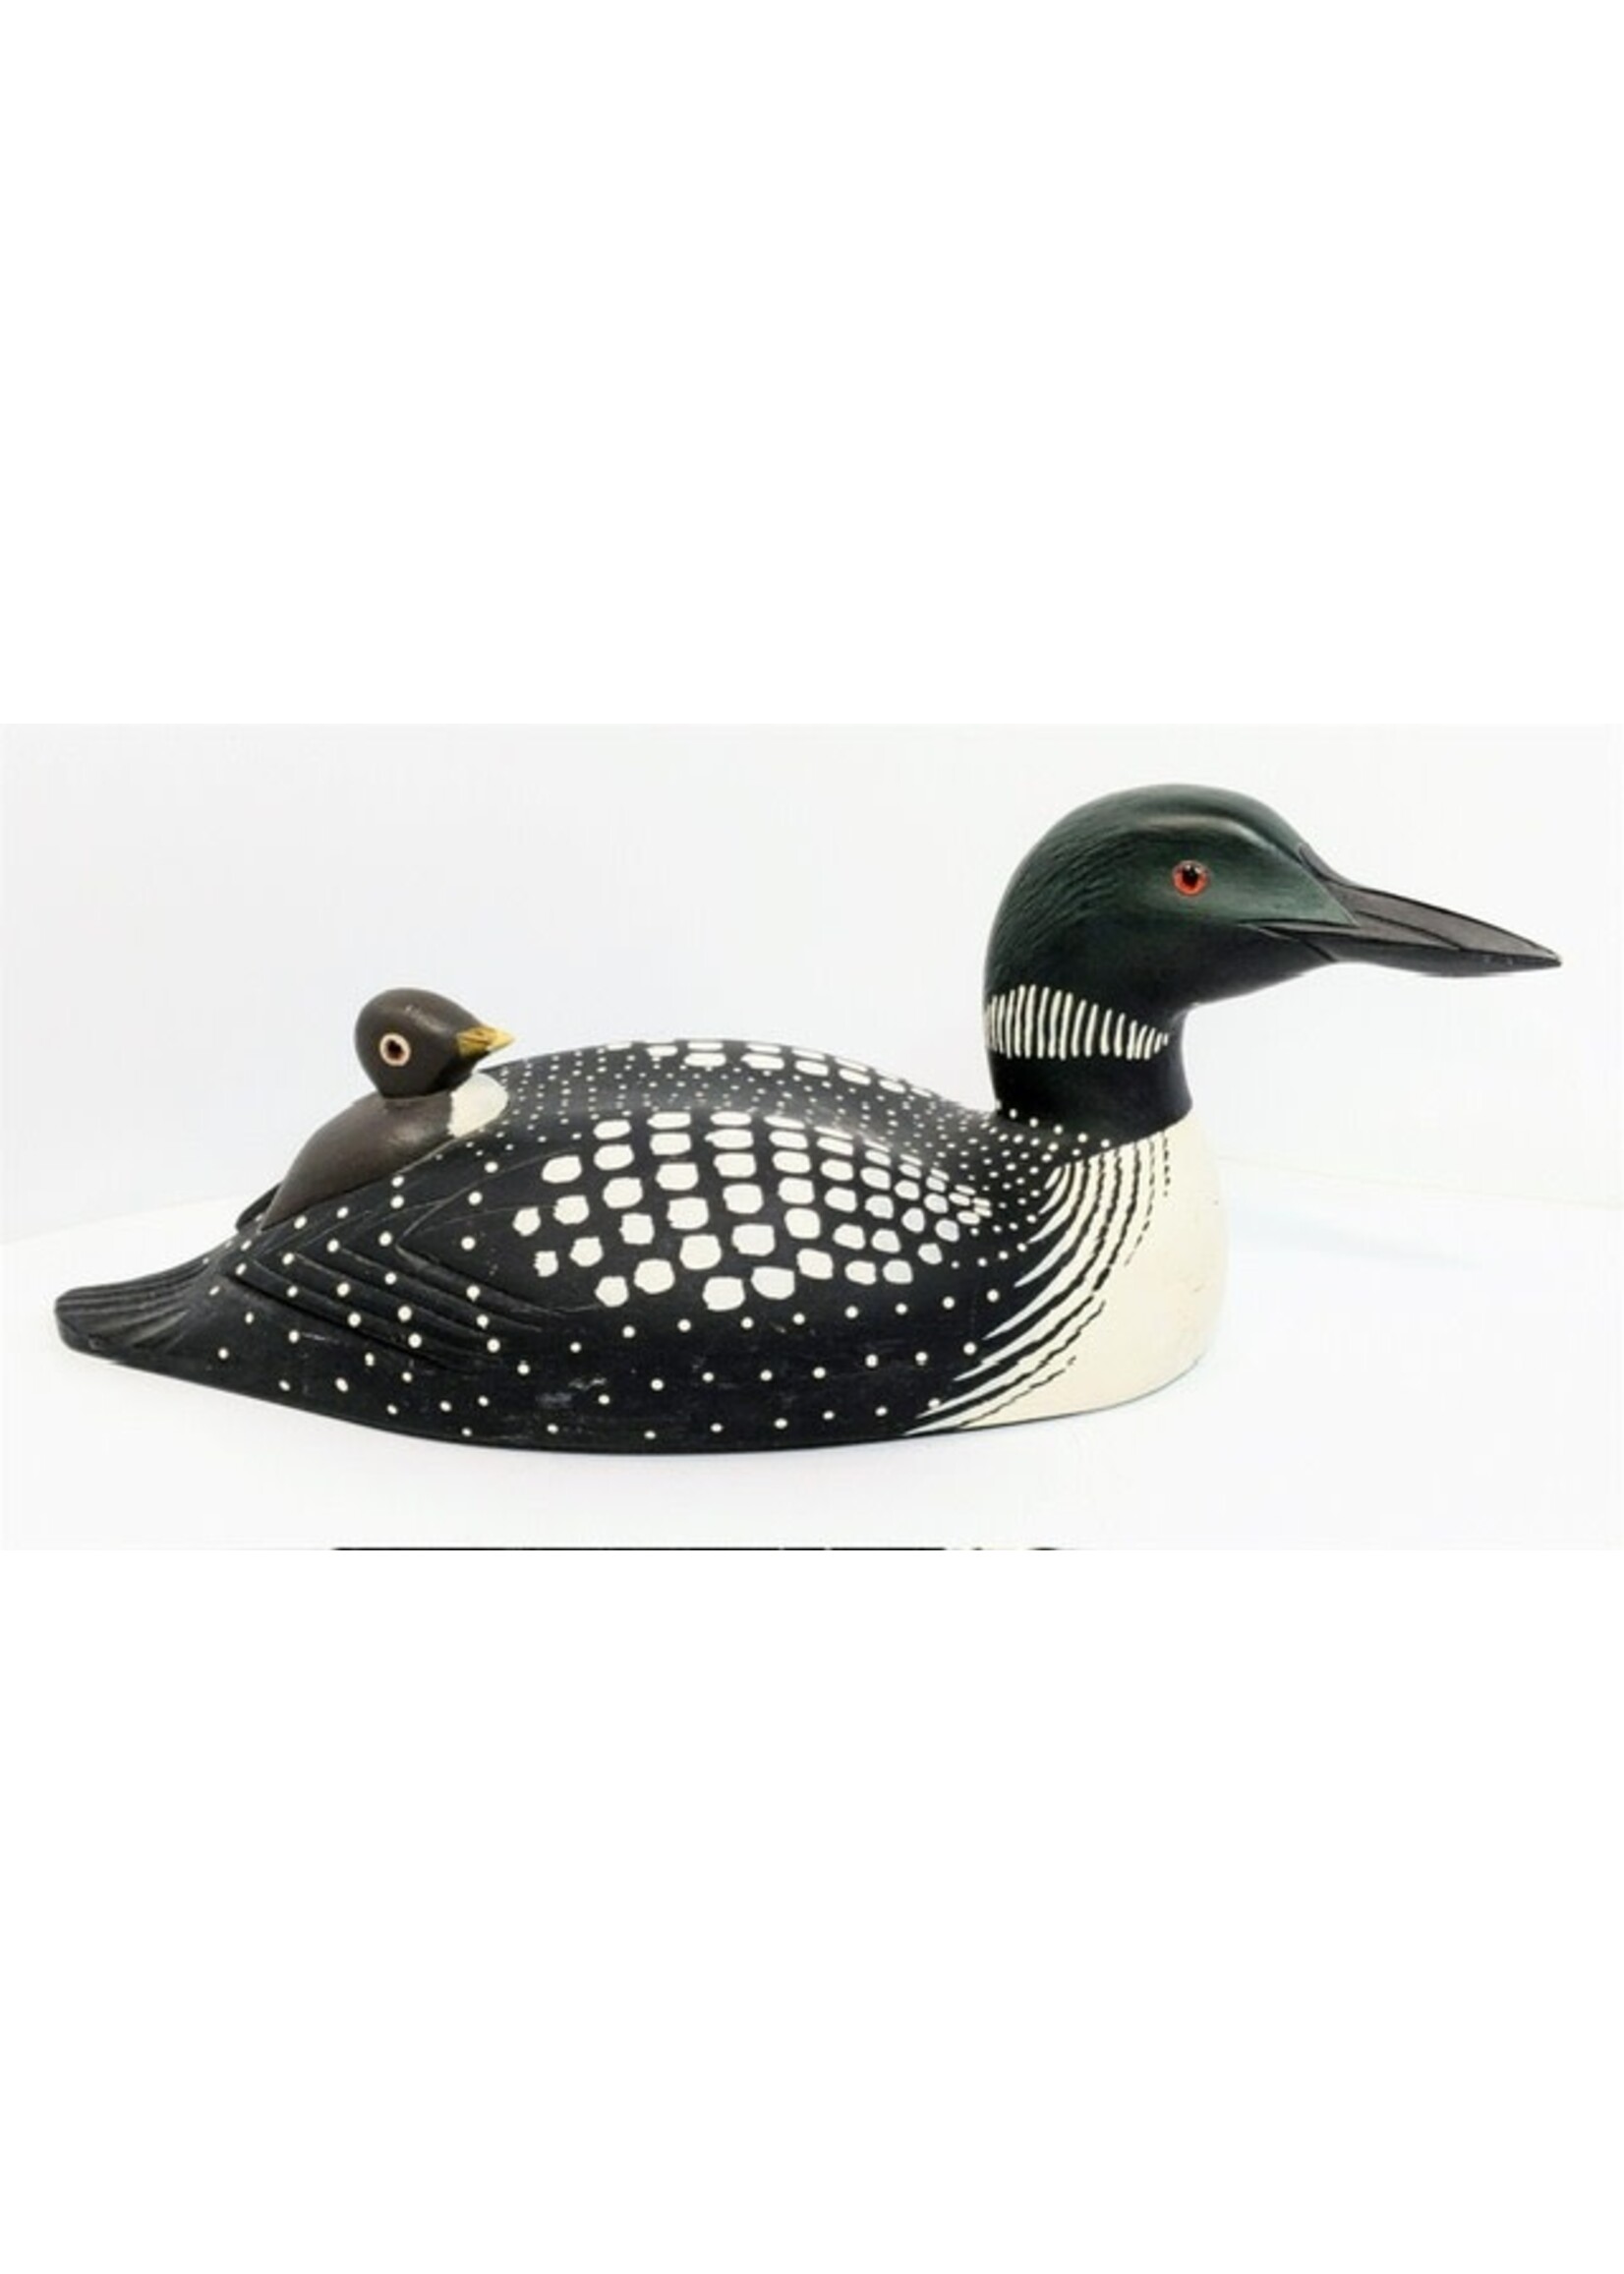 Vintage Loon Carving By T.Walker W. Glass Eyes